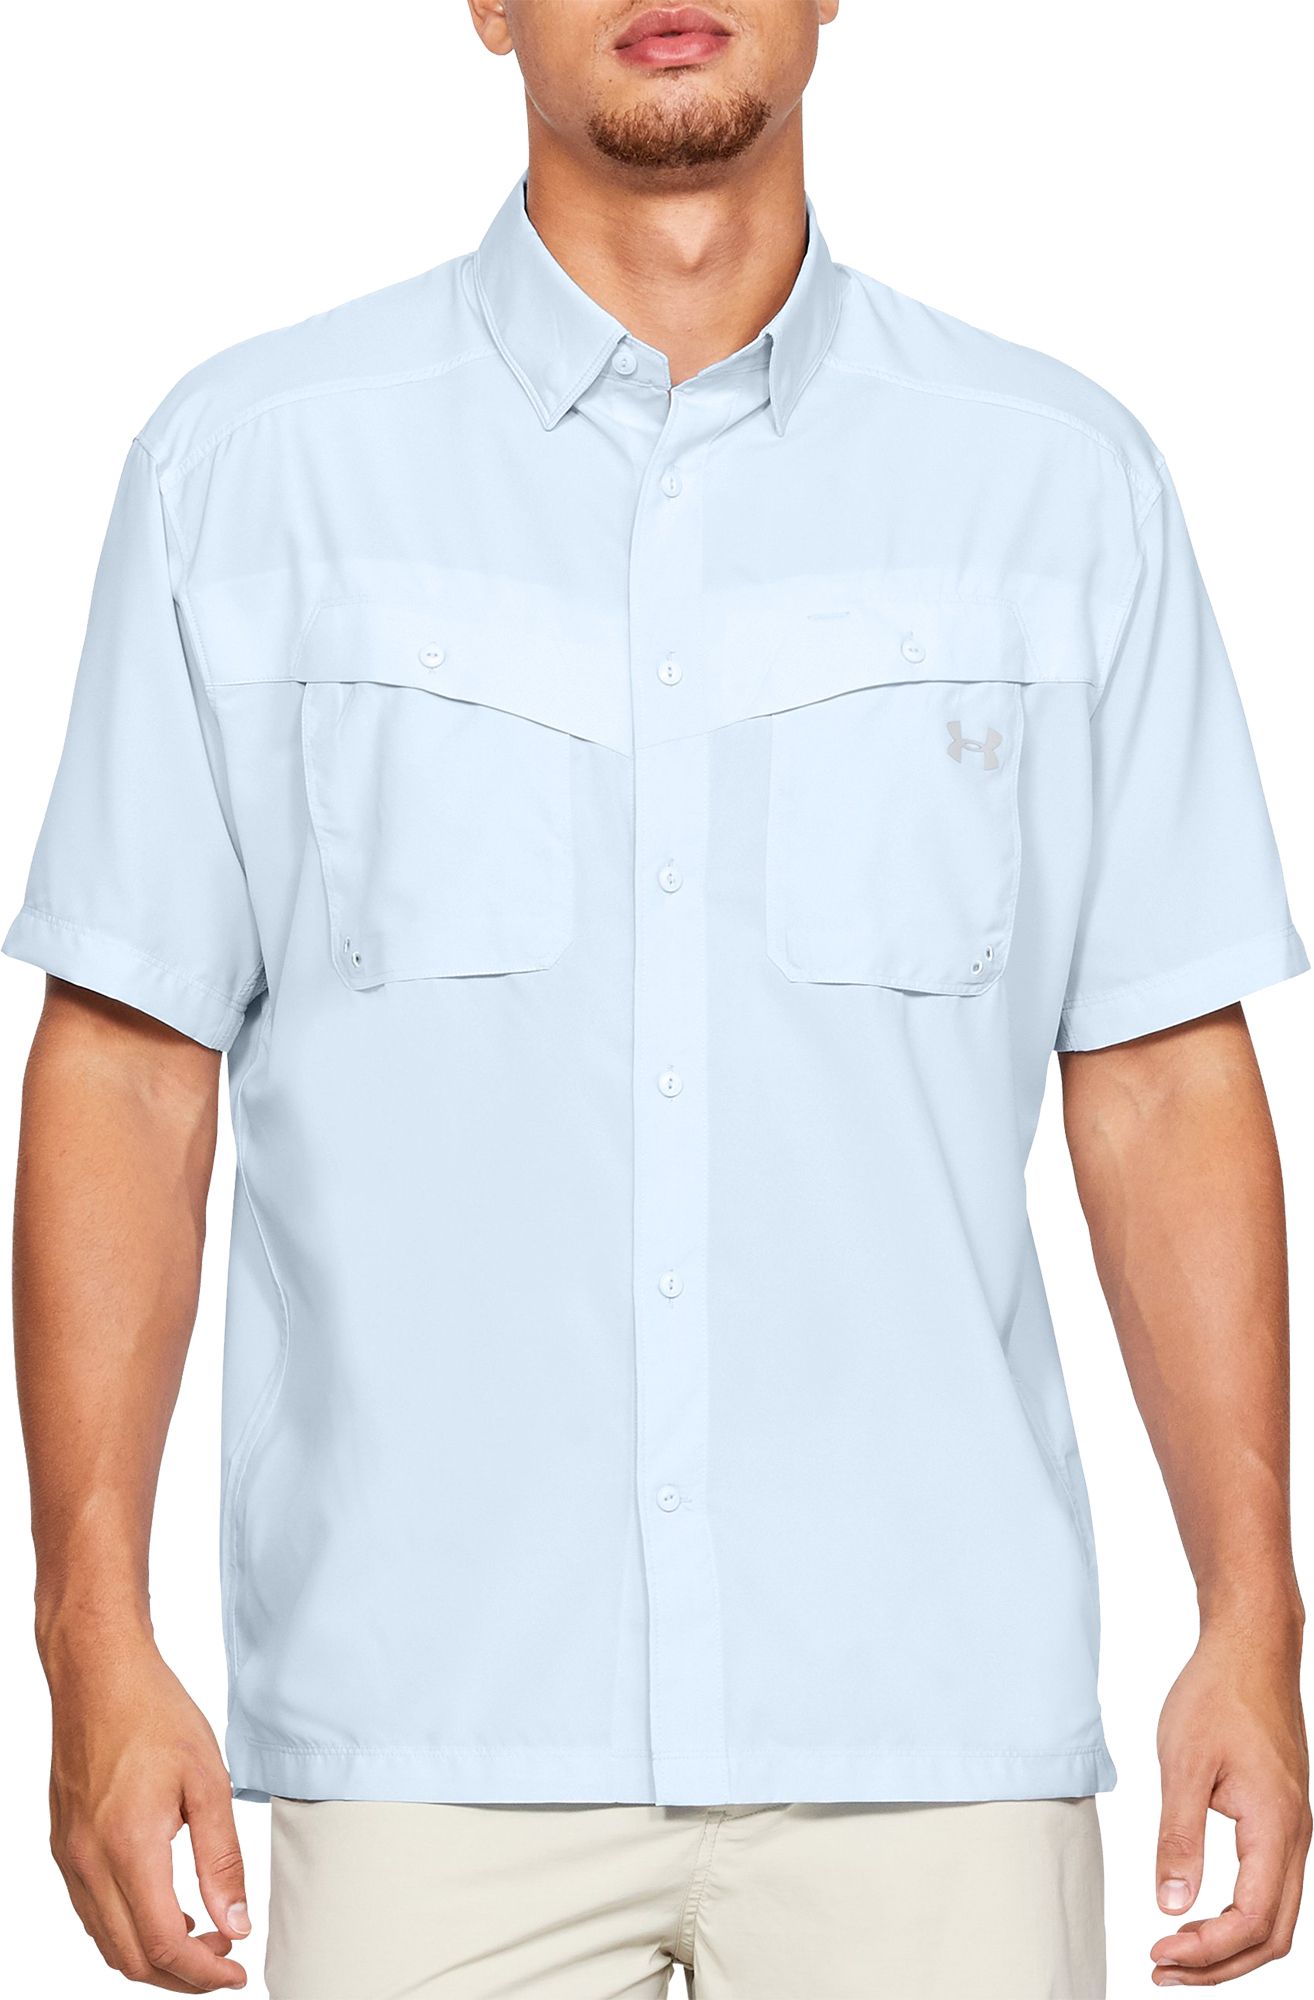 under armour tide chaser shirt